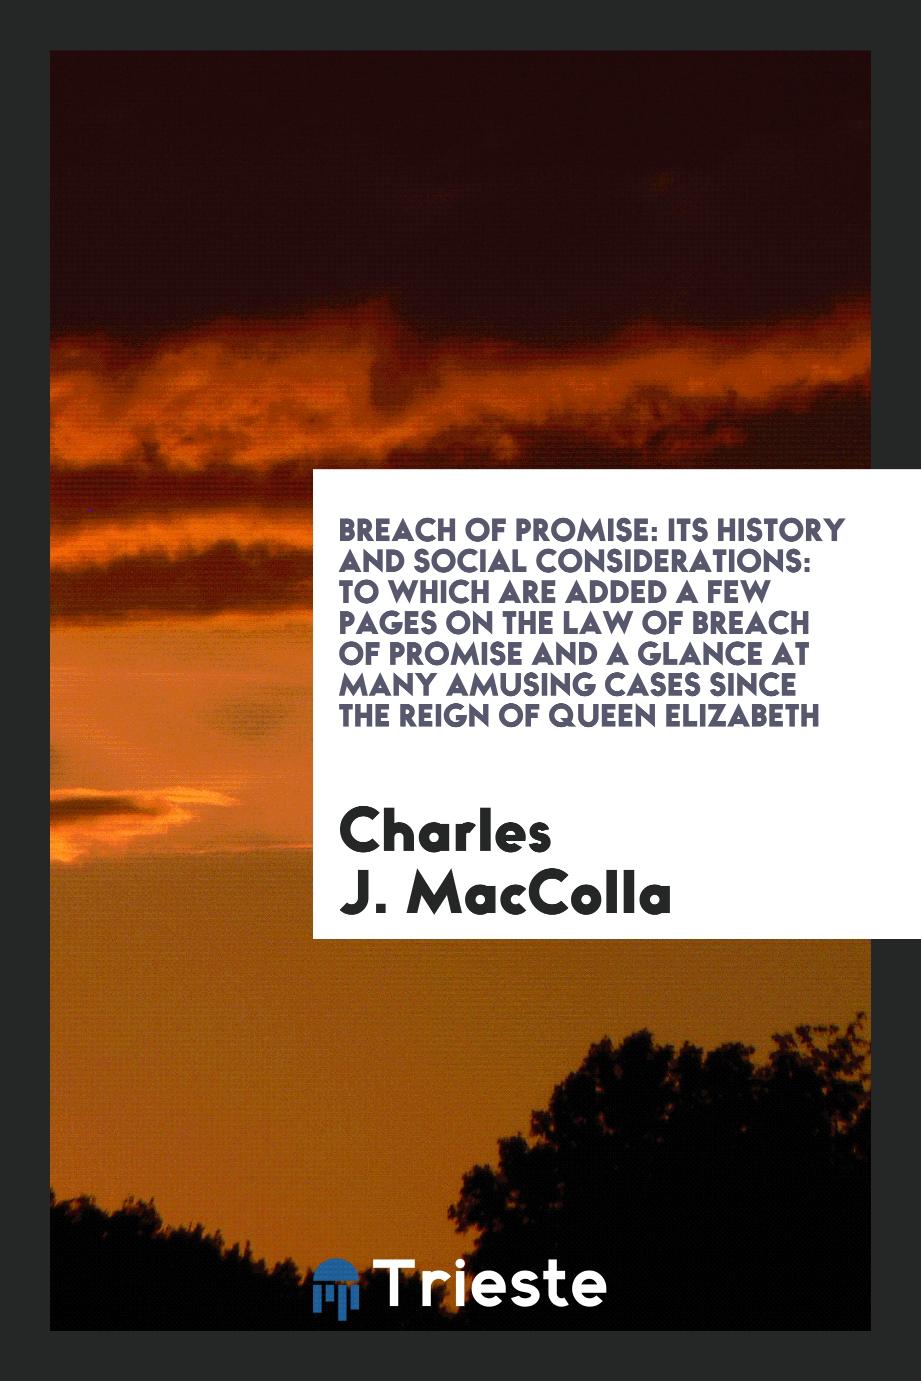 Breach of Promise: Its History and Social Considerations: To Which Are Added a Few Pages on the Law of Breach of Promise and a Glance at Many Amusing Cases since the Reign of Queen Elizabeth